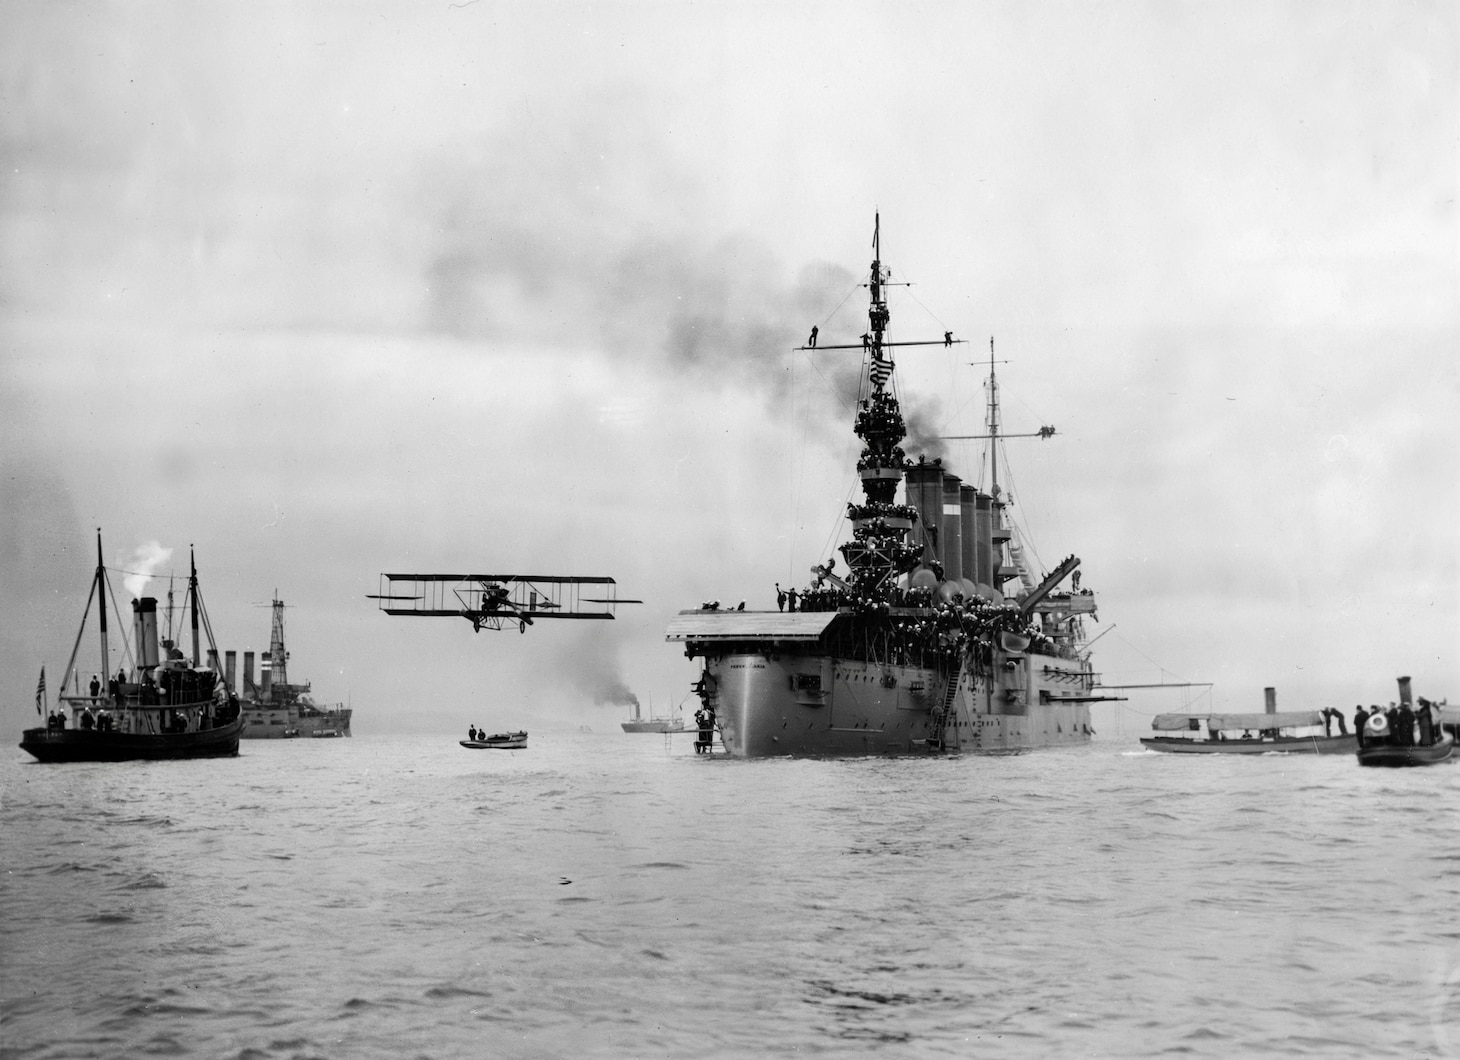 Eugene Ely’s plane taking off from the cruiser USS Pennsylvania (ACR 4) in 1911.  This is an accretion of 13 photographs related the S-005 Eugene Ely Collection. They were possibly compiled and donated by his wife Mabel in the 1930’s. The pages may have come from the original five scrapbooksthat were donated at an unknown date. These are photos of Ely’s first flight off the cruiser USS Birmingham (CL 2) in 1910, and his landing on USS Pennsylvania (ACR 4) in 1911. Some photos were assigned NH numbers (NH 1385, NH 77501, NH 77610, NH 82737) , see NH records for more extensive caption information. Photos may have been mounted out of sequence.